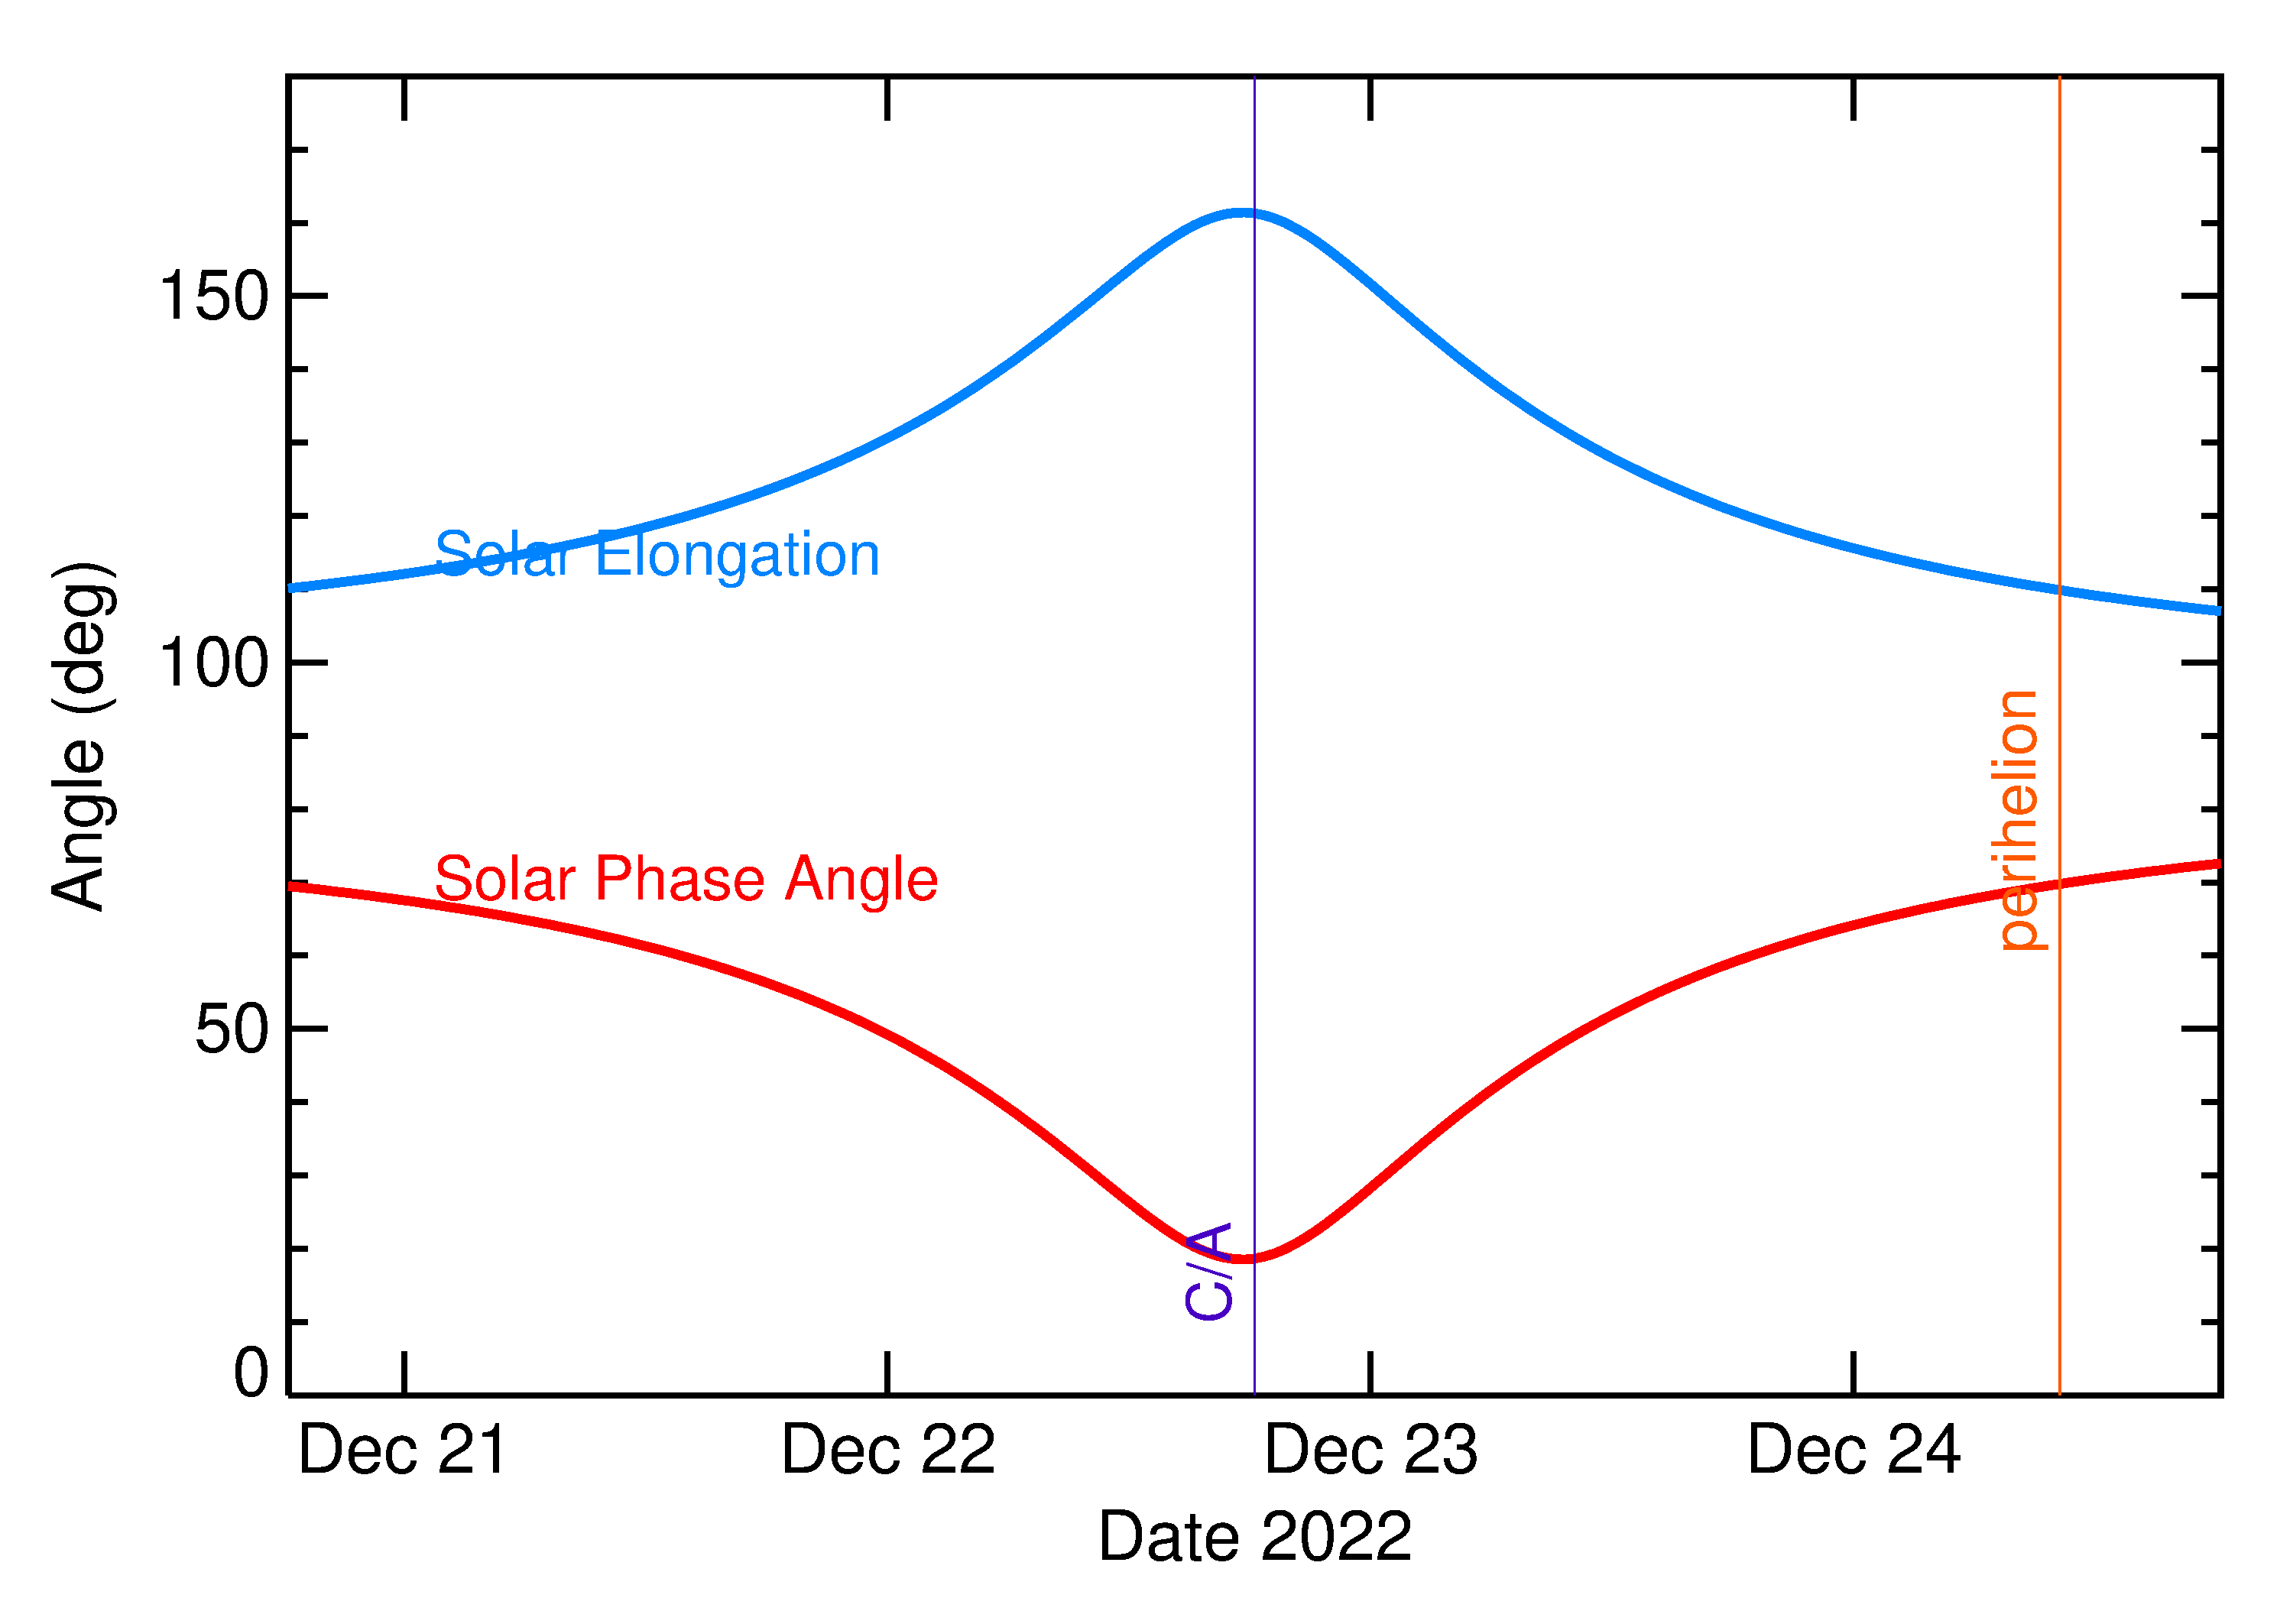 Solar Elongation and Solar Phase Angle of 2022 YG2 in the days around closest approach